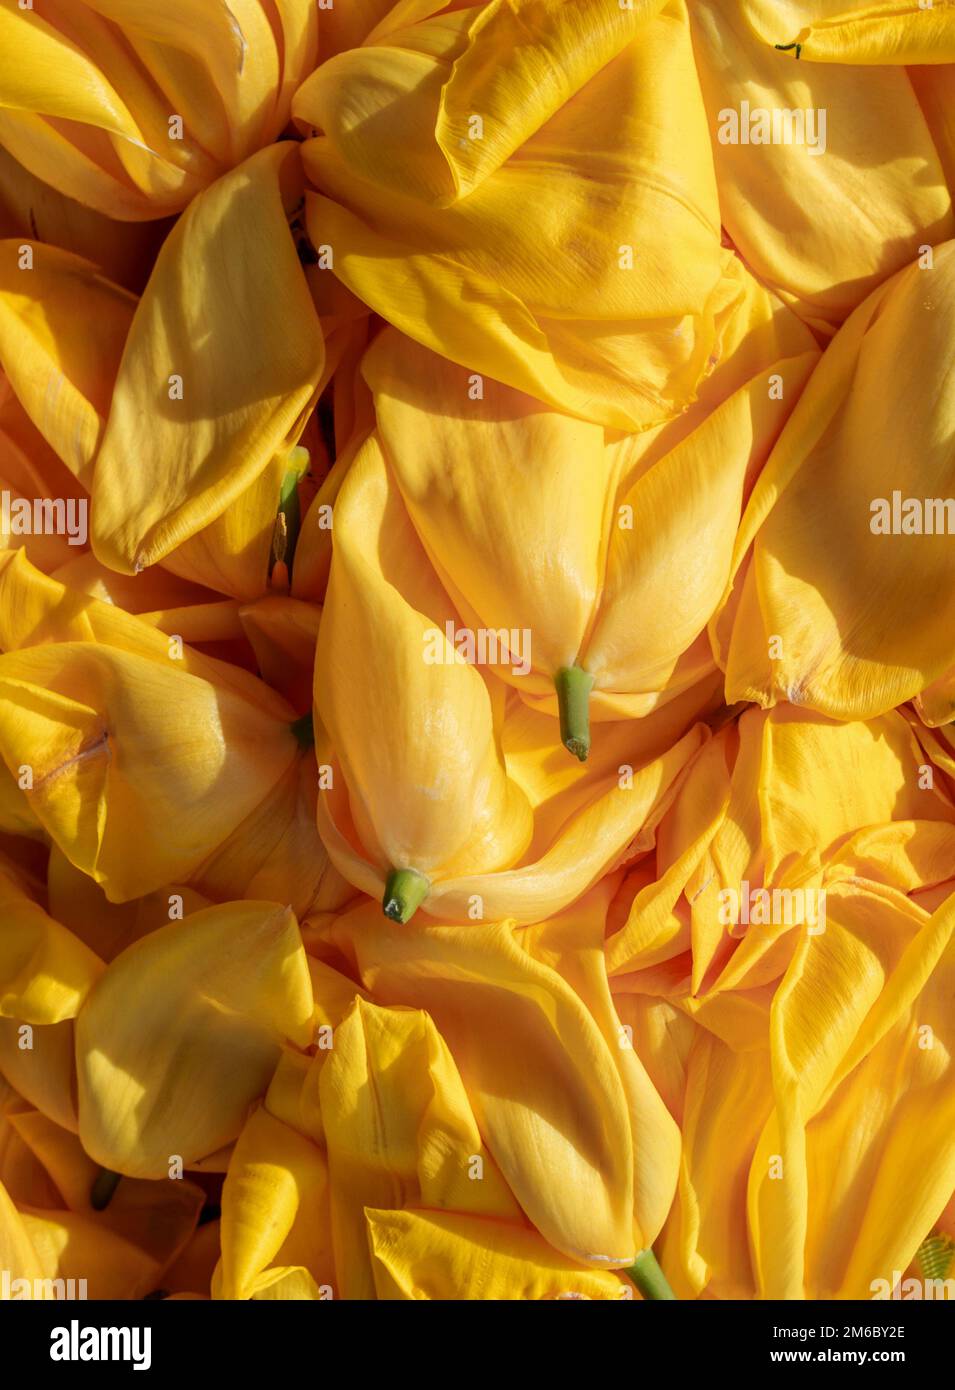 Background cut yellow buds, wilted tulips, shot from above Stock Photo